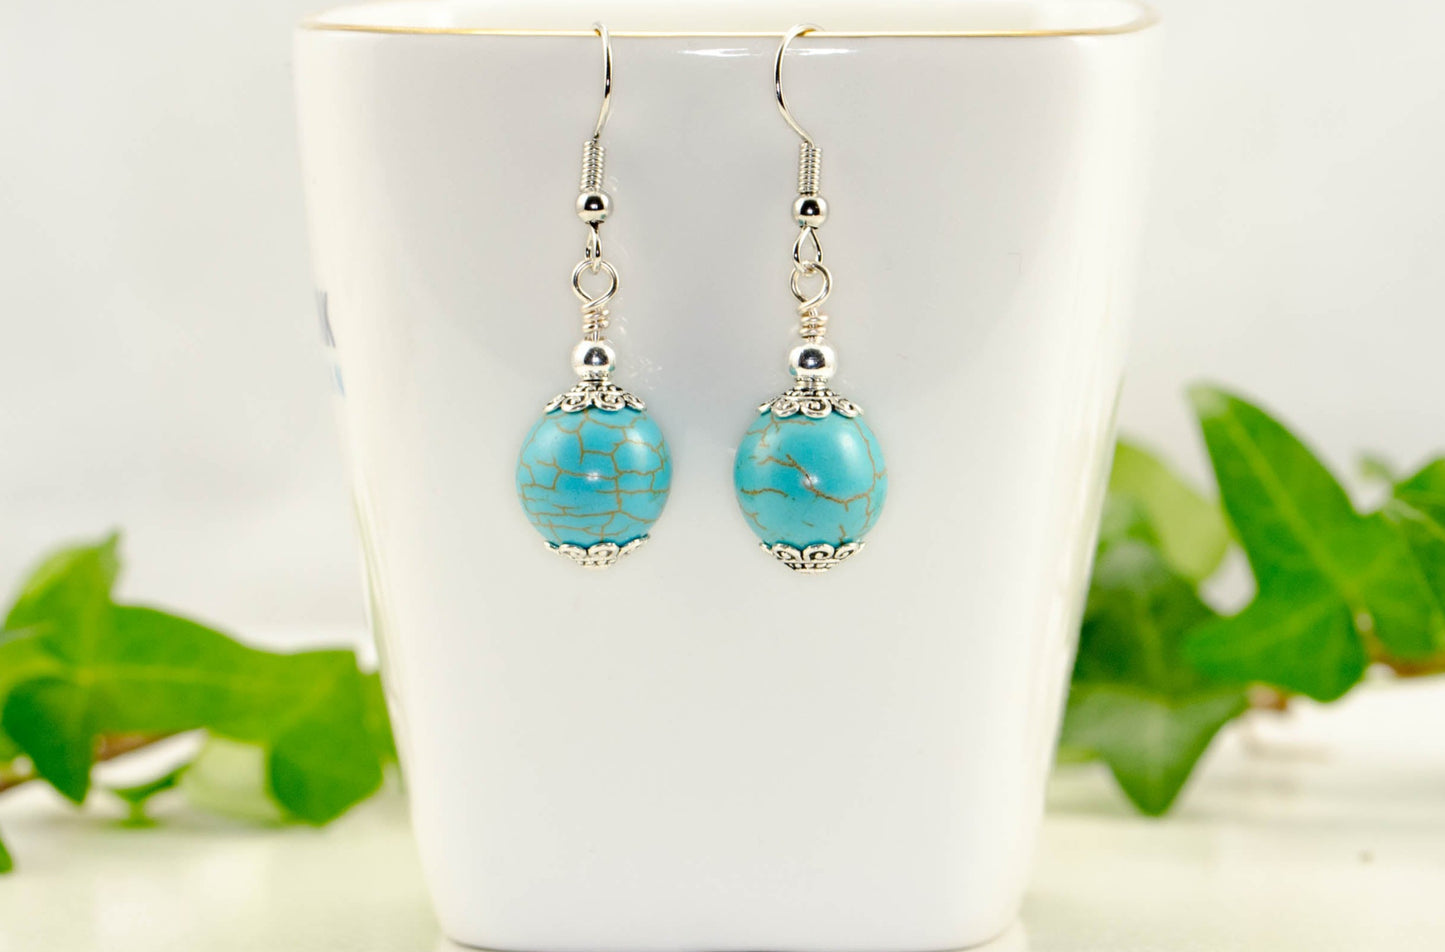 12mm Turquoise Howlite Dangle Earrings displayed on a tea cup.